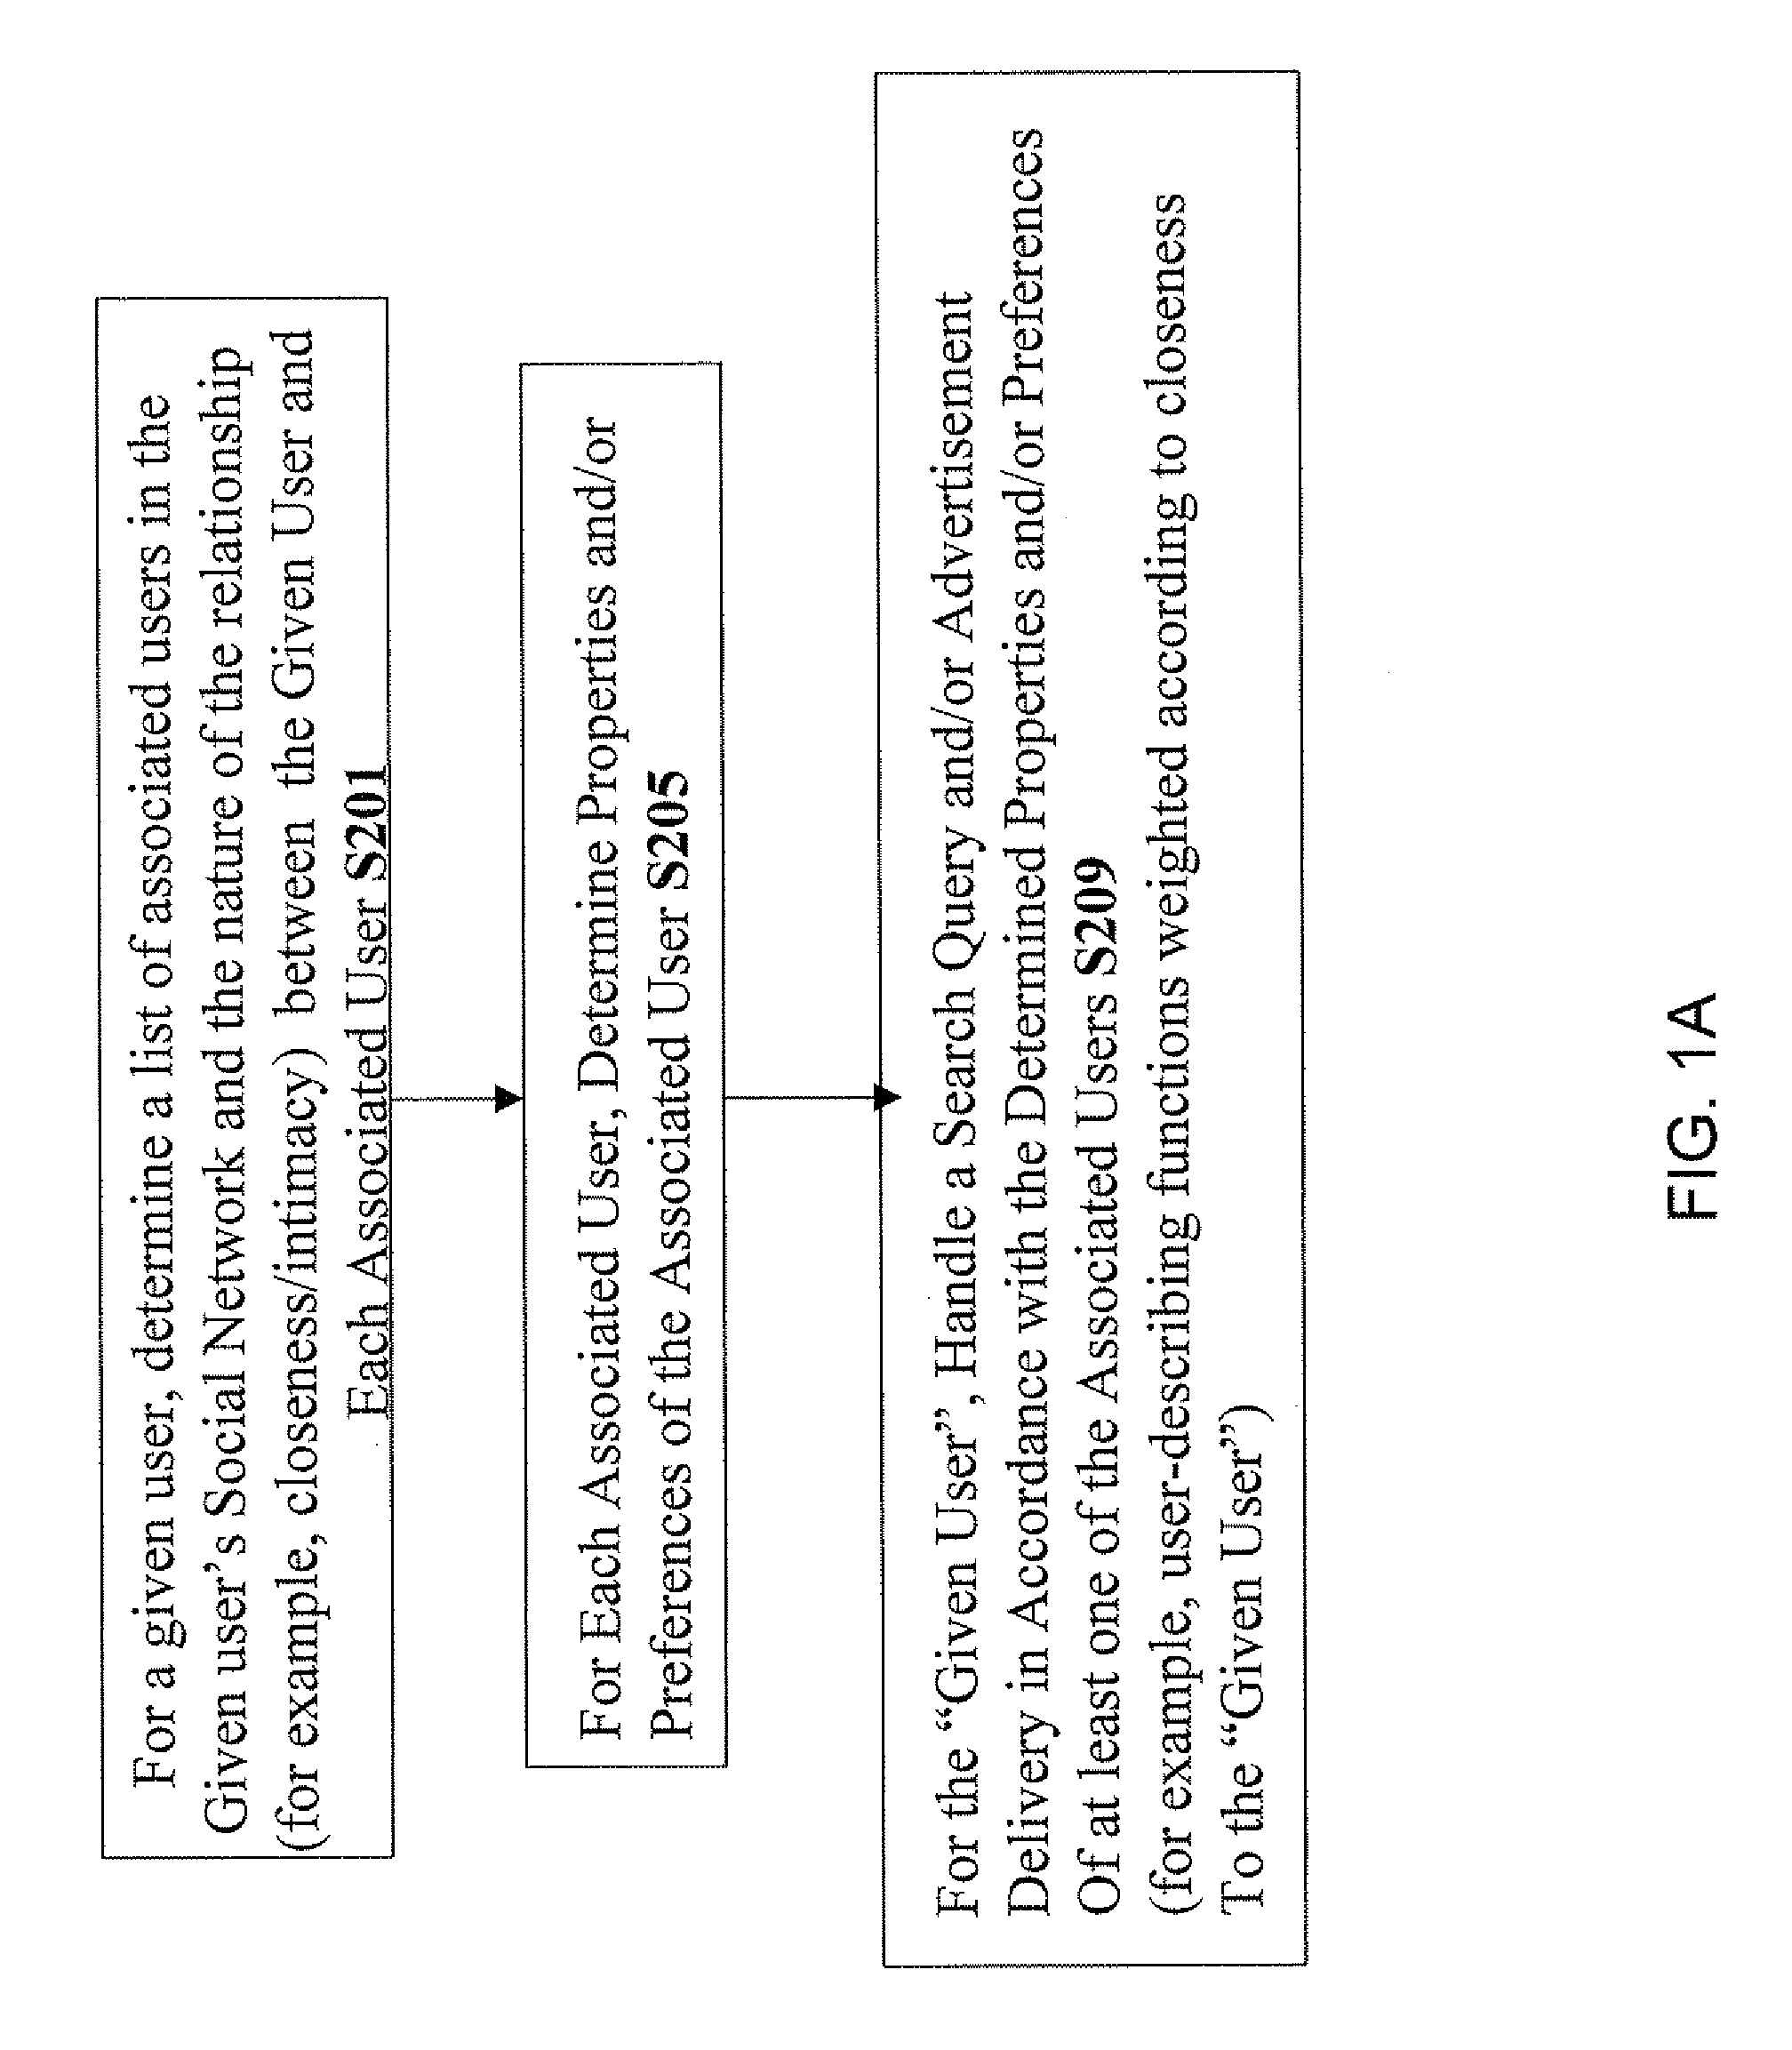 Apparatus and computer code for providing social-network dependent information retrieval services